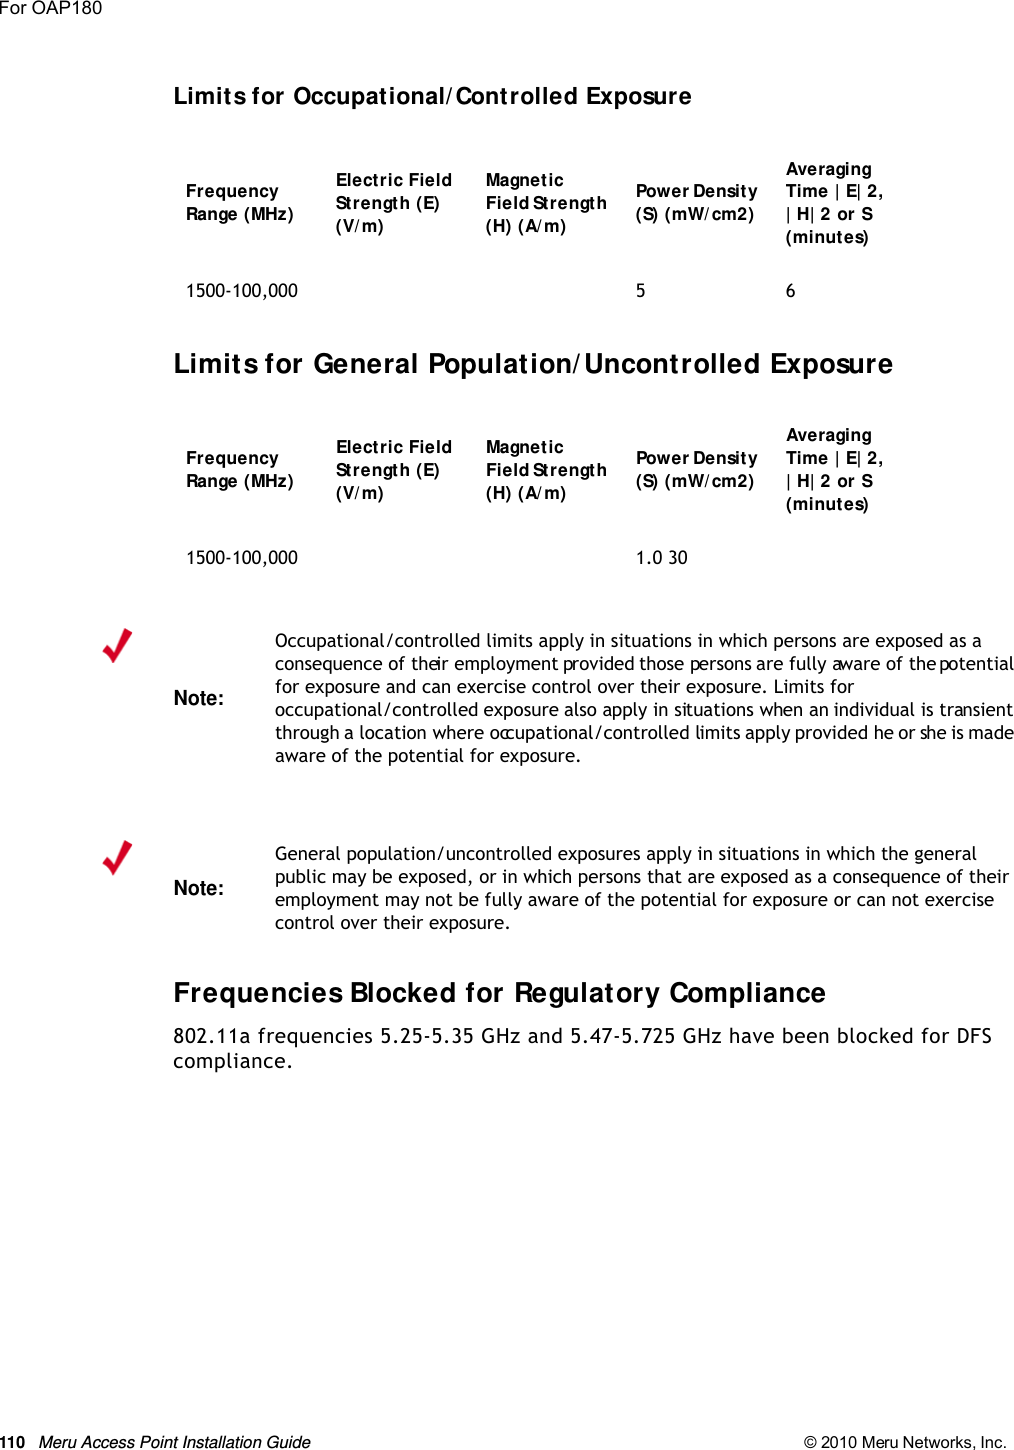 110 Meru Access Point Installation Guide © 2010 Meru Networks, Inc. For OAP180 Limits for Occupational/ Controlled ExposureLimits for General Population/ Uncontrolled ExposureFrequencies Blocked for Regulatory Compliance802.11a frequencies 5.25-5.35 GHz and 5.47-5.725 GHz have been blocked for DFS compliance.Frequency Range (MHz) Electric Field Strength (E) (V/ m) Magnetic Field Strength (H) (A/m)Pow e r  De nsit y (S) (mW/ cm2)Averaging Time | E| 2,  | H| 2 or S (minutes)1500-100,000 5 6Frequency Range (MHz) Electric Field Strength (E) (V/ m) Magnetic Field Strength (H) (A/m)Pow e r  De nsit y (S) (mW/ cm2)Averaging Time | E| 2,  | H| 2 or S (minutes)1500-100,000 1.0 30Note:Occupational/controlled limits apply in situations in which persons are exposed as a consequence of their employment provided those persons are fully aware of the potential for exposure and can exercise control over their exposure. Limits for occupational/controlled exposure also apply in situations when an individual is transient through a location where occupational/controlled limits apply provided he or she is made aware of the potential for exposure. Note:General population/uncontrolled exposures apply in situations in which the general public may be exposed, or in which persons that are exposed as a consequence of their employment may not be fully aware of the potential for exposure or can not exercise control over their exposure.